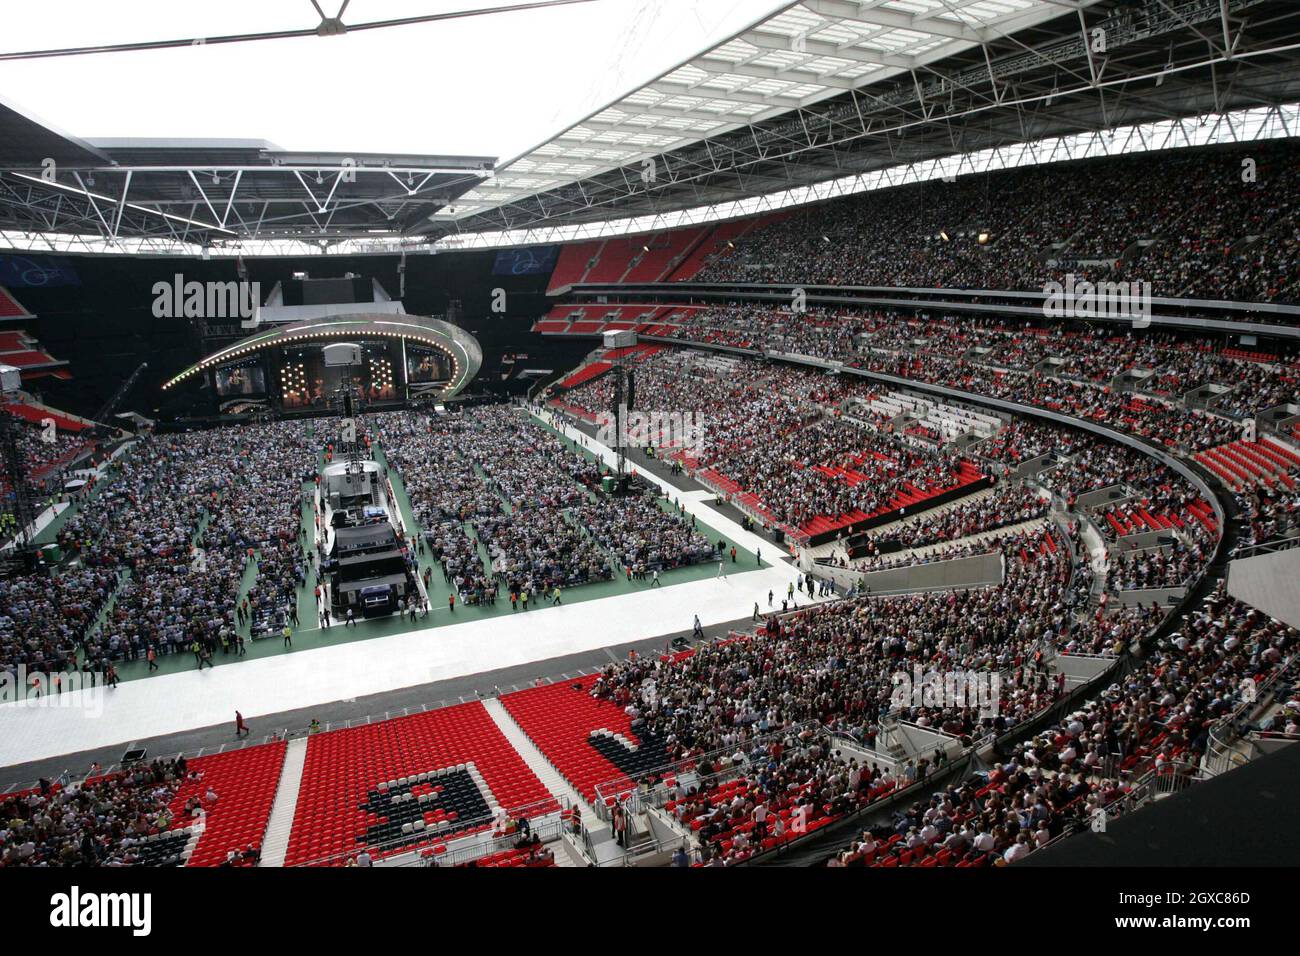 Concert goers enjoy the Concert for Diana at Wembley Stadium in London. Stock Photo